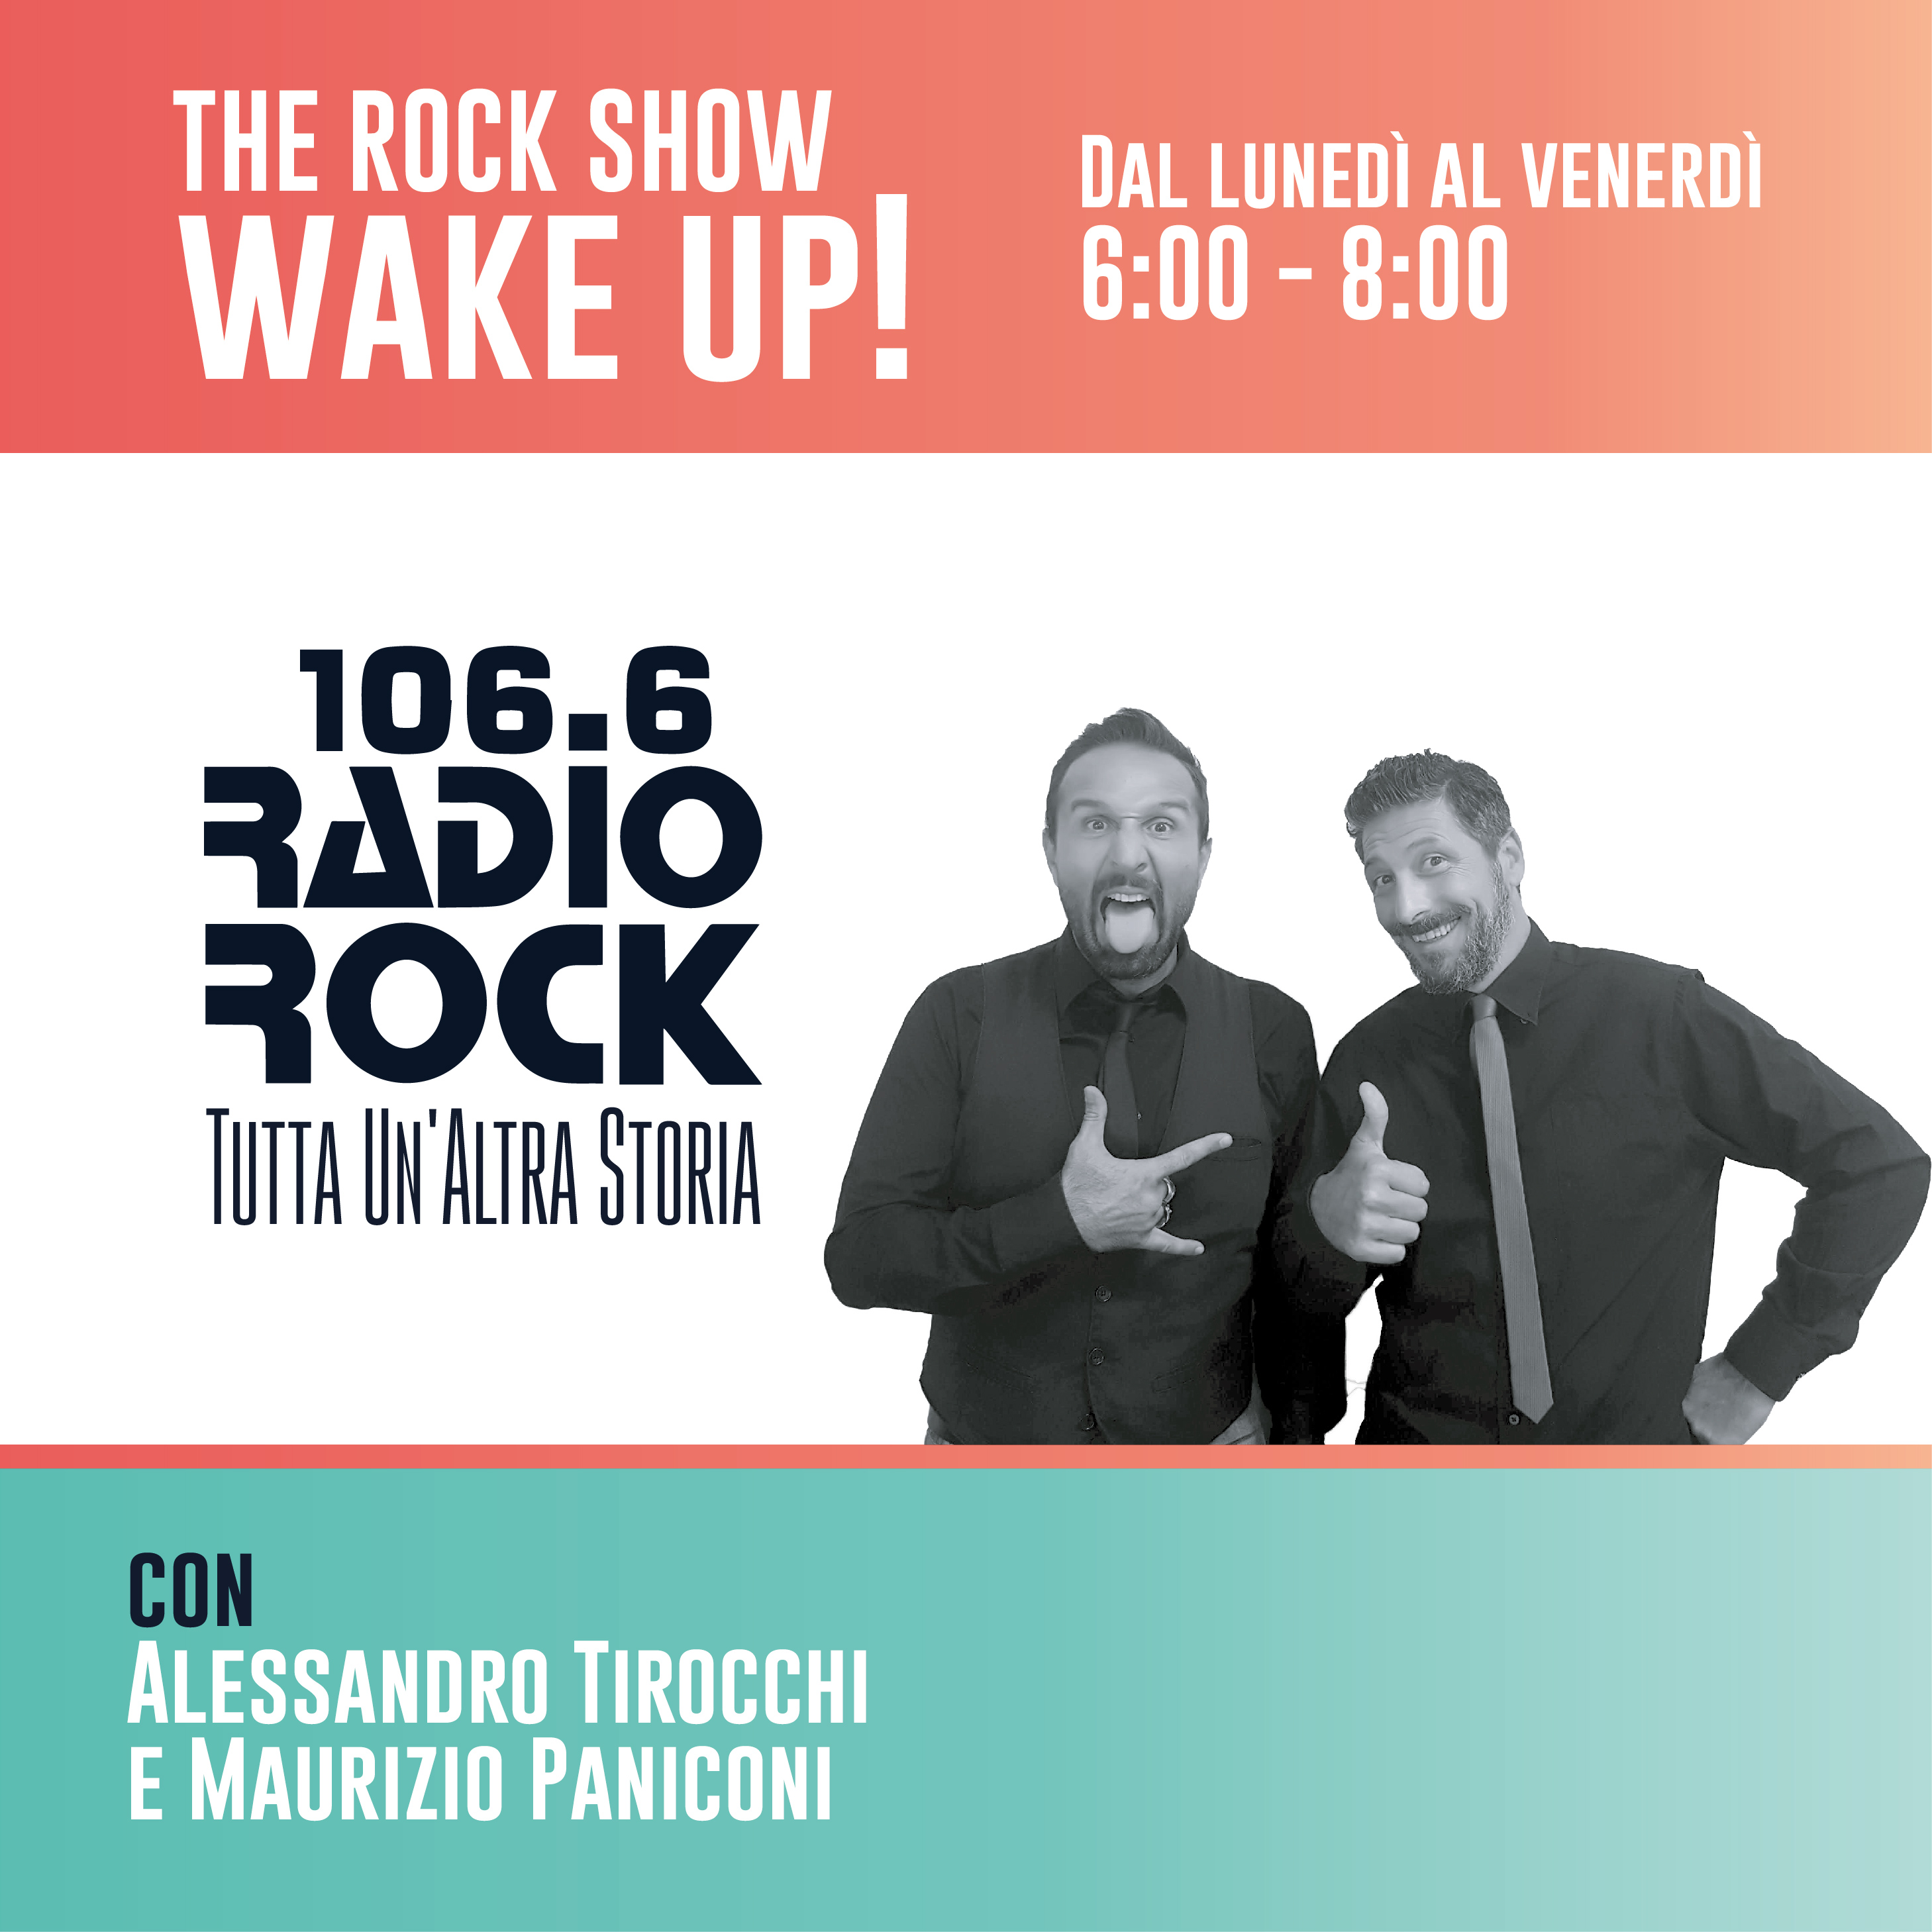 The Rock Show: Wake Up! (01-10-20)